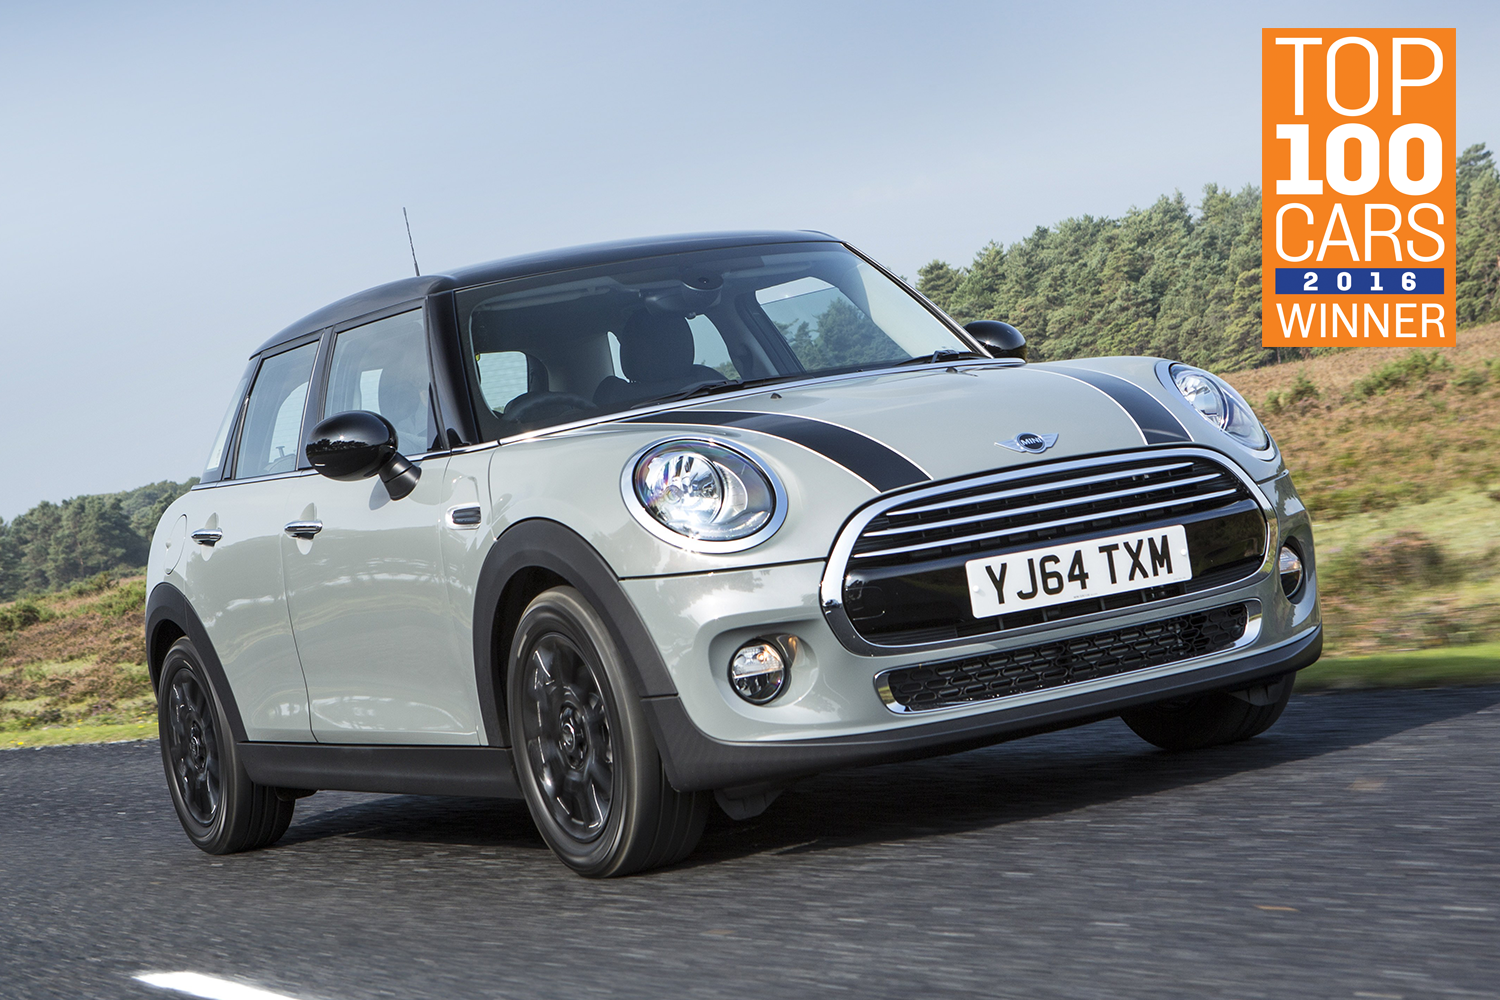 Mini Hatch: The Sunday Times Top 100 Cars - Top 5 Superminis